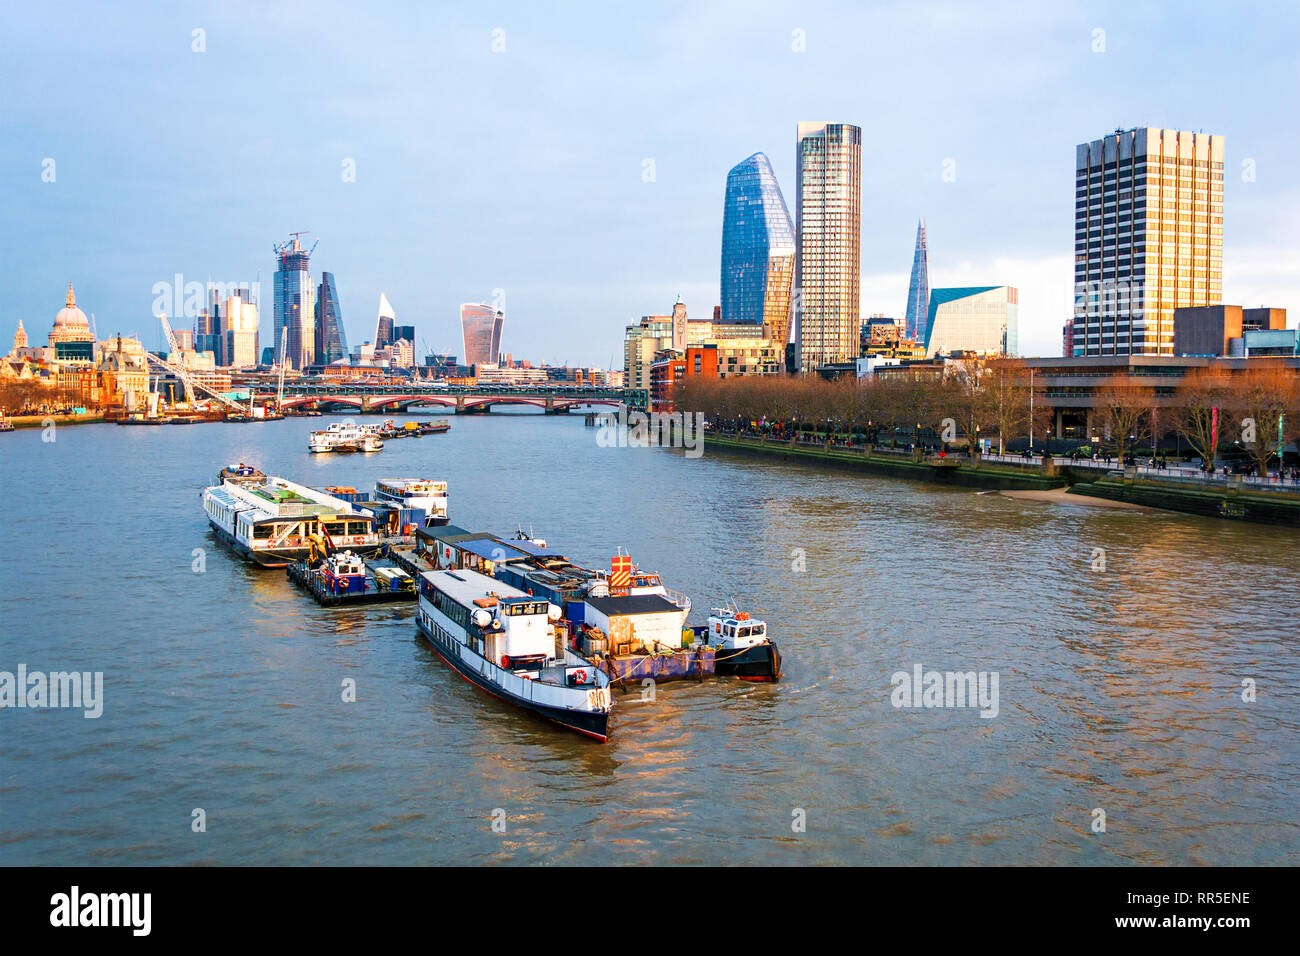 Cityscape of London, River Thames by dusk Stock Photo